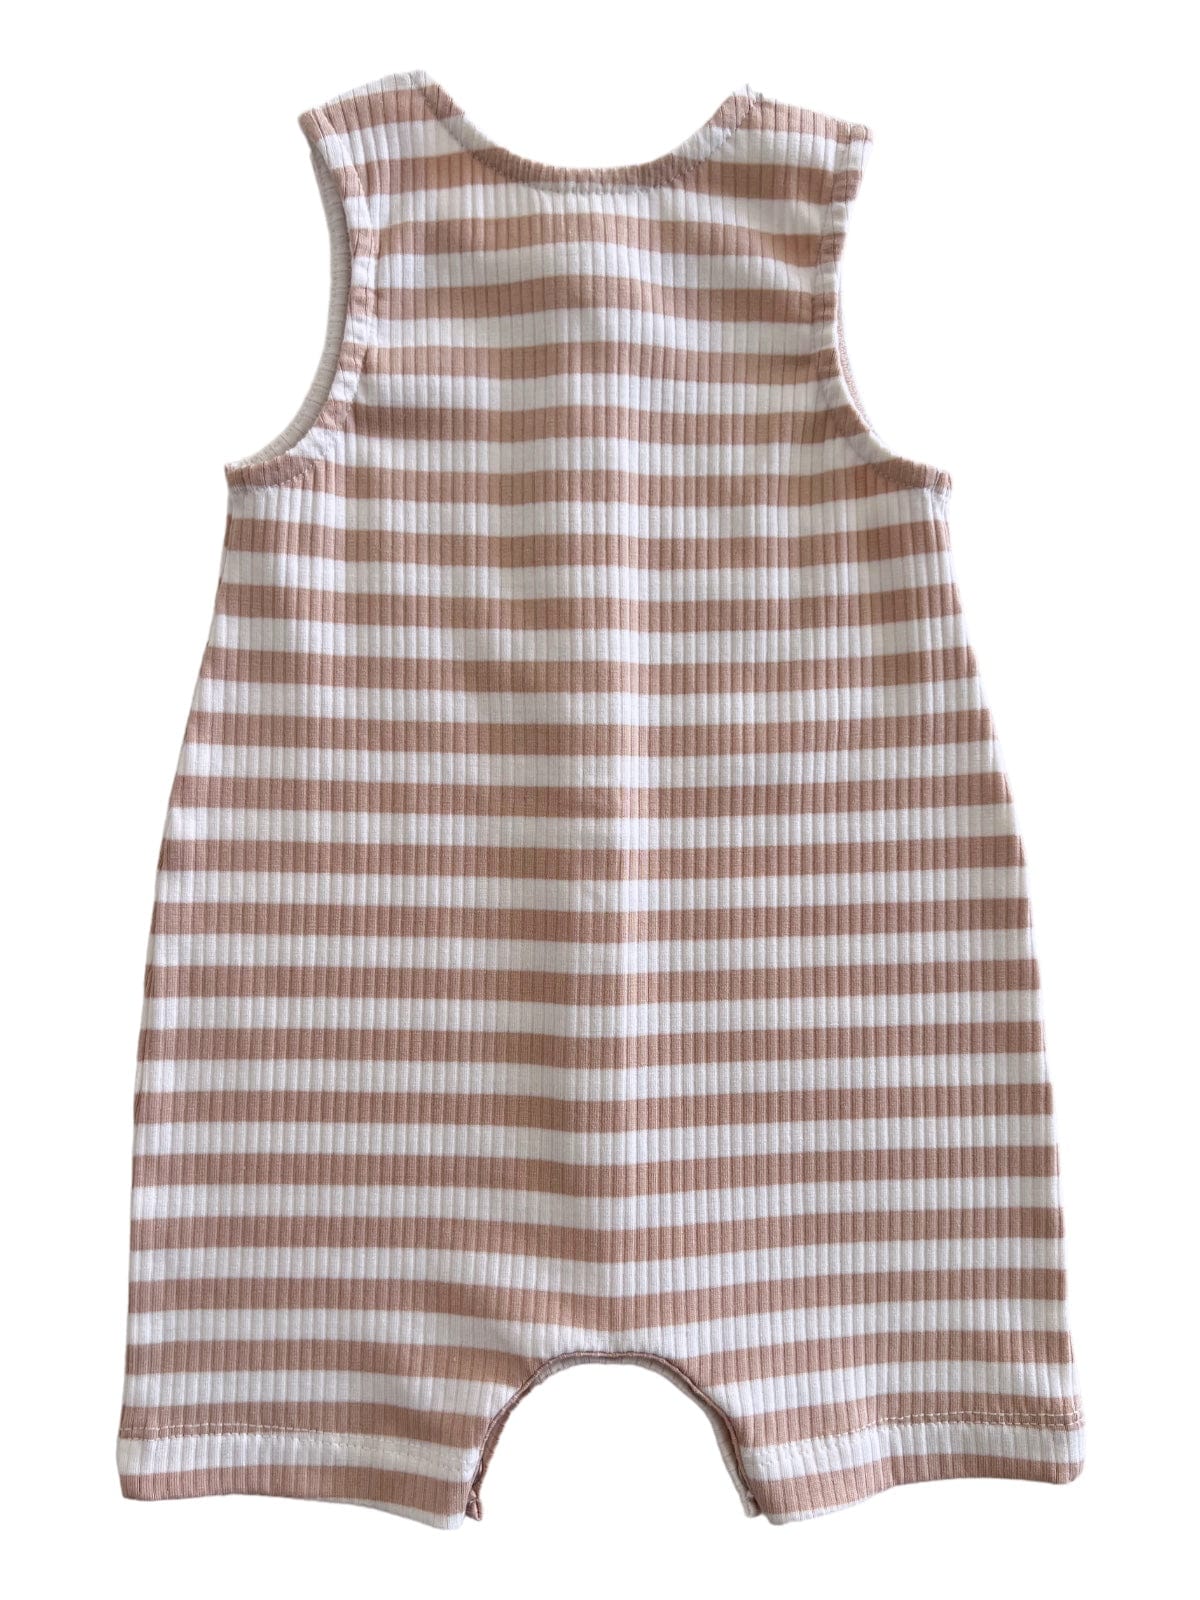 Siix Collection Baby Romper SIIX Collection Organic Ribbed Bay Short Jumpsuit (Tan Stripe)